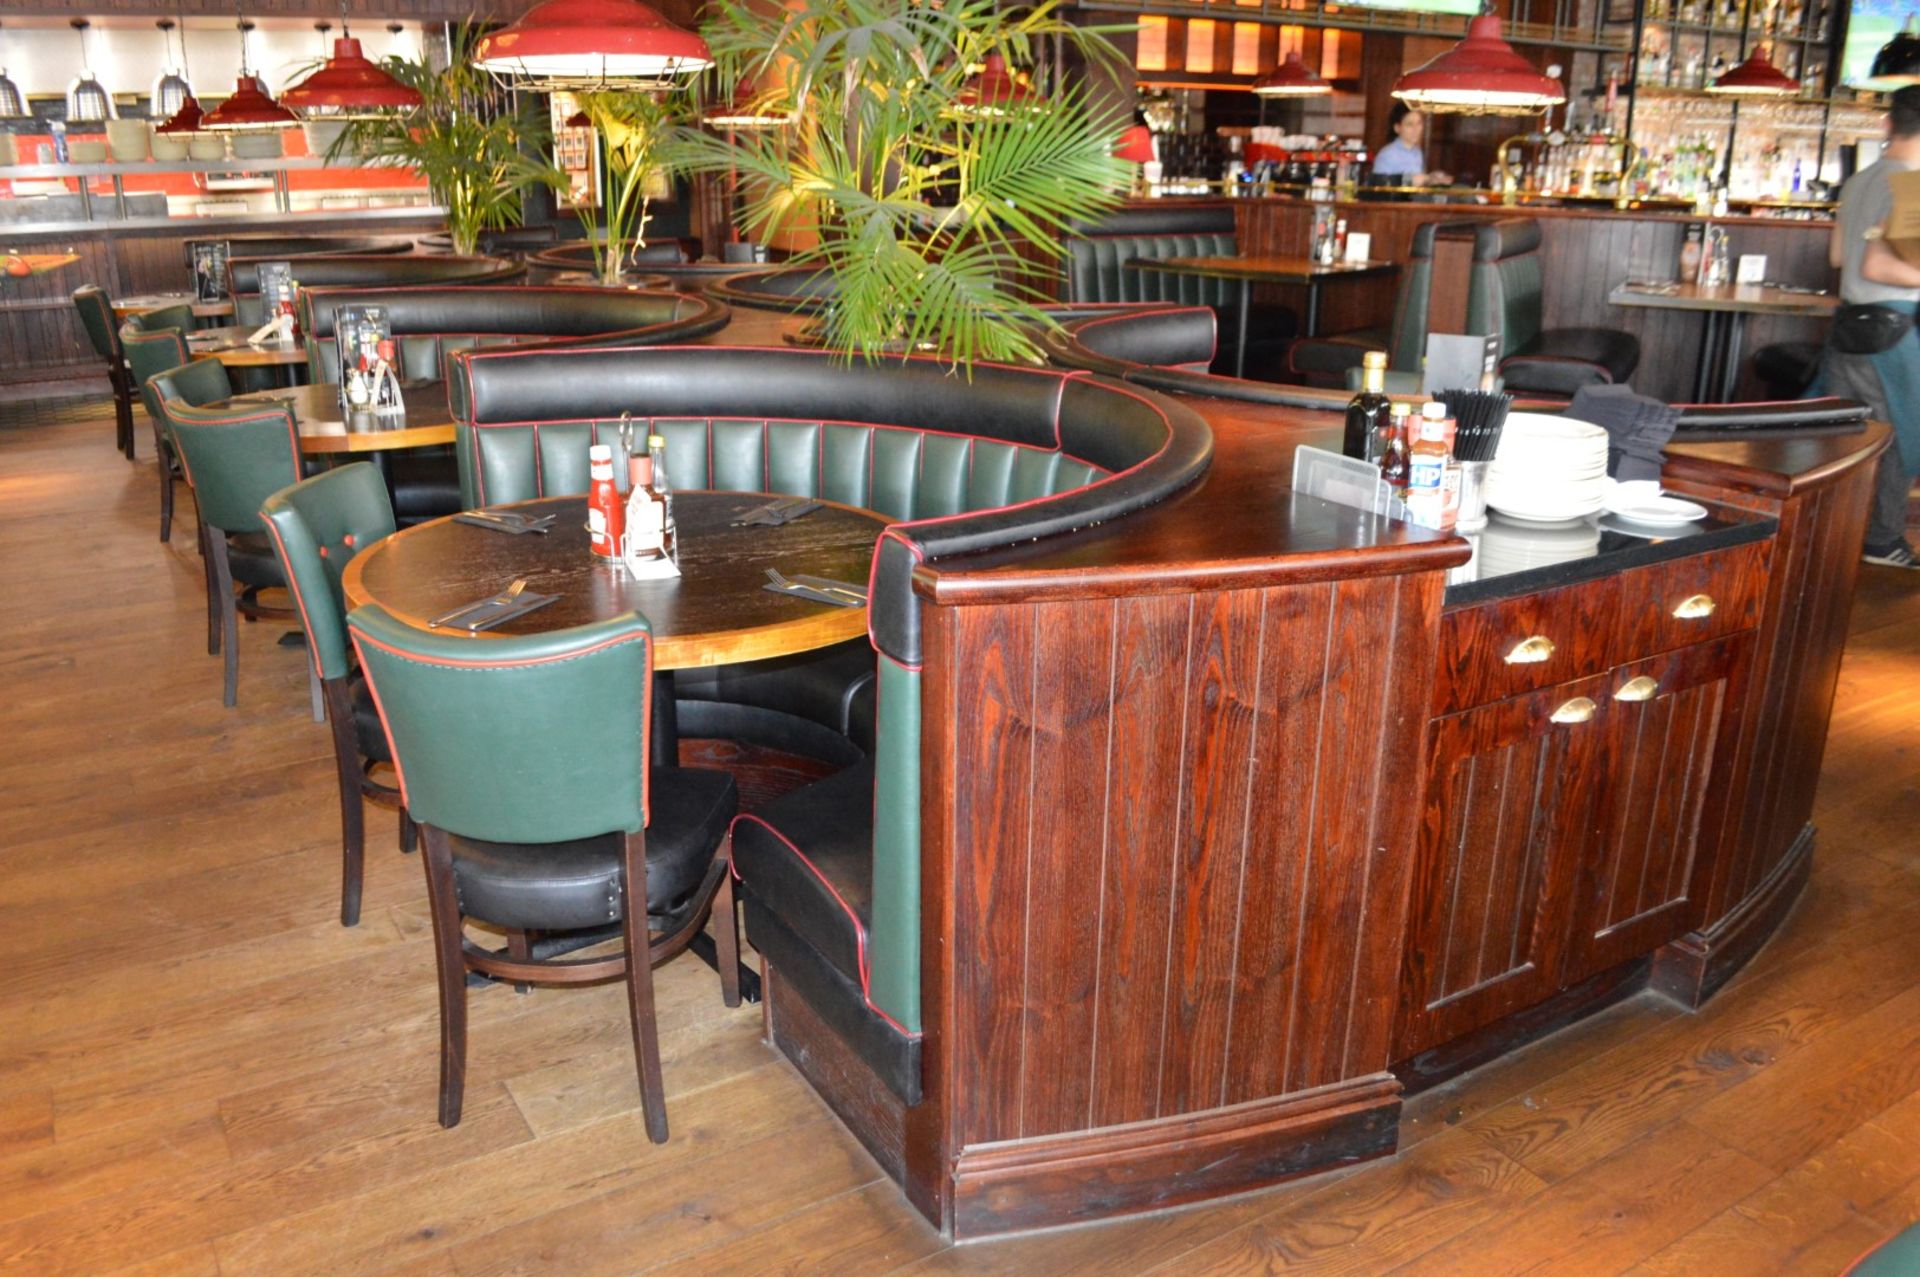 8 x Contemporary Half Circle Seating Booths Waitress Point and Wood Paneling - Features a Leather